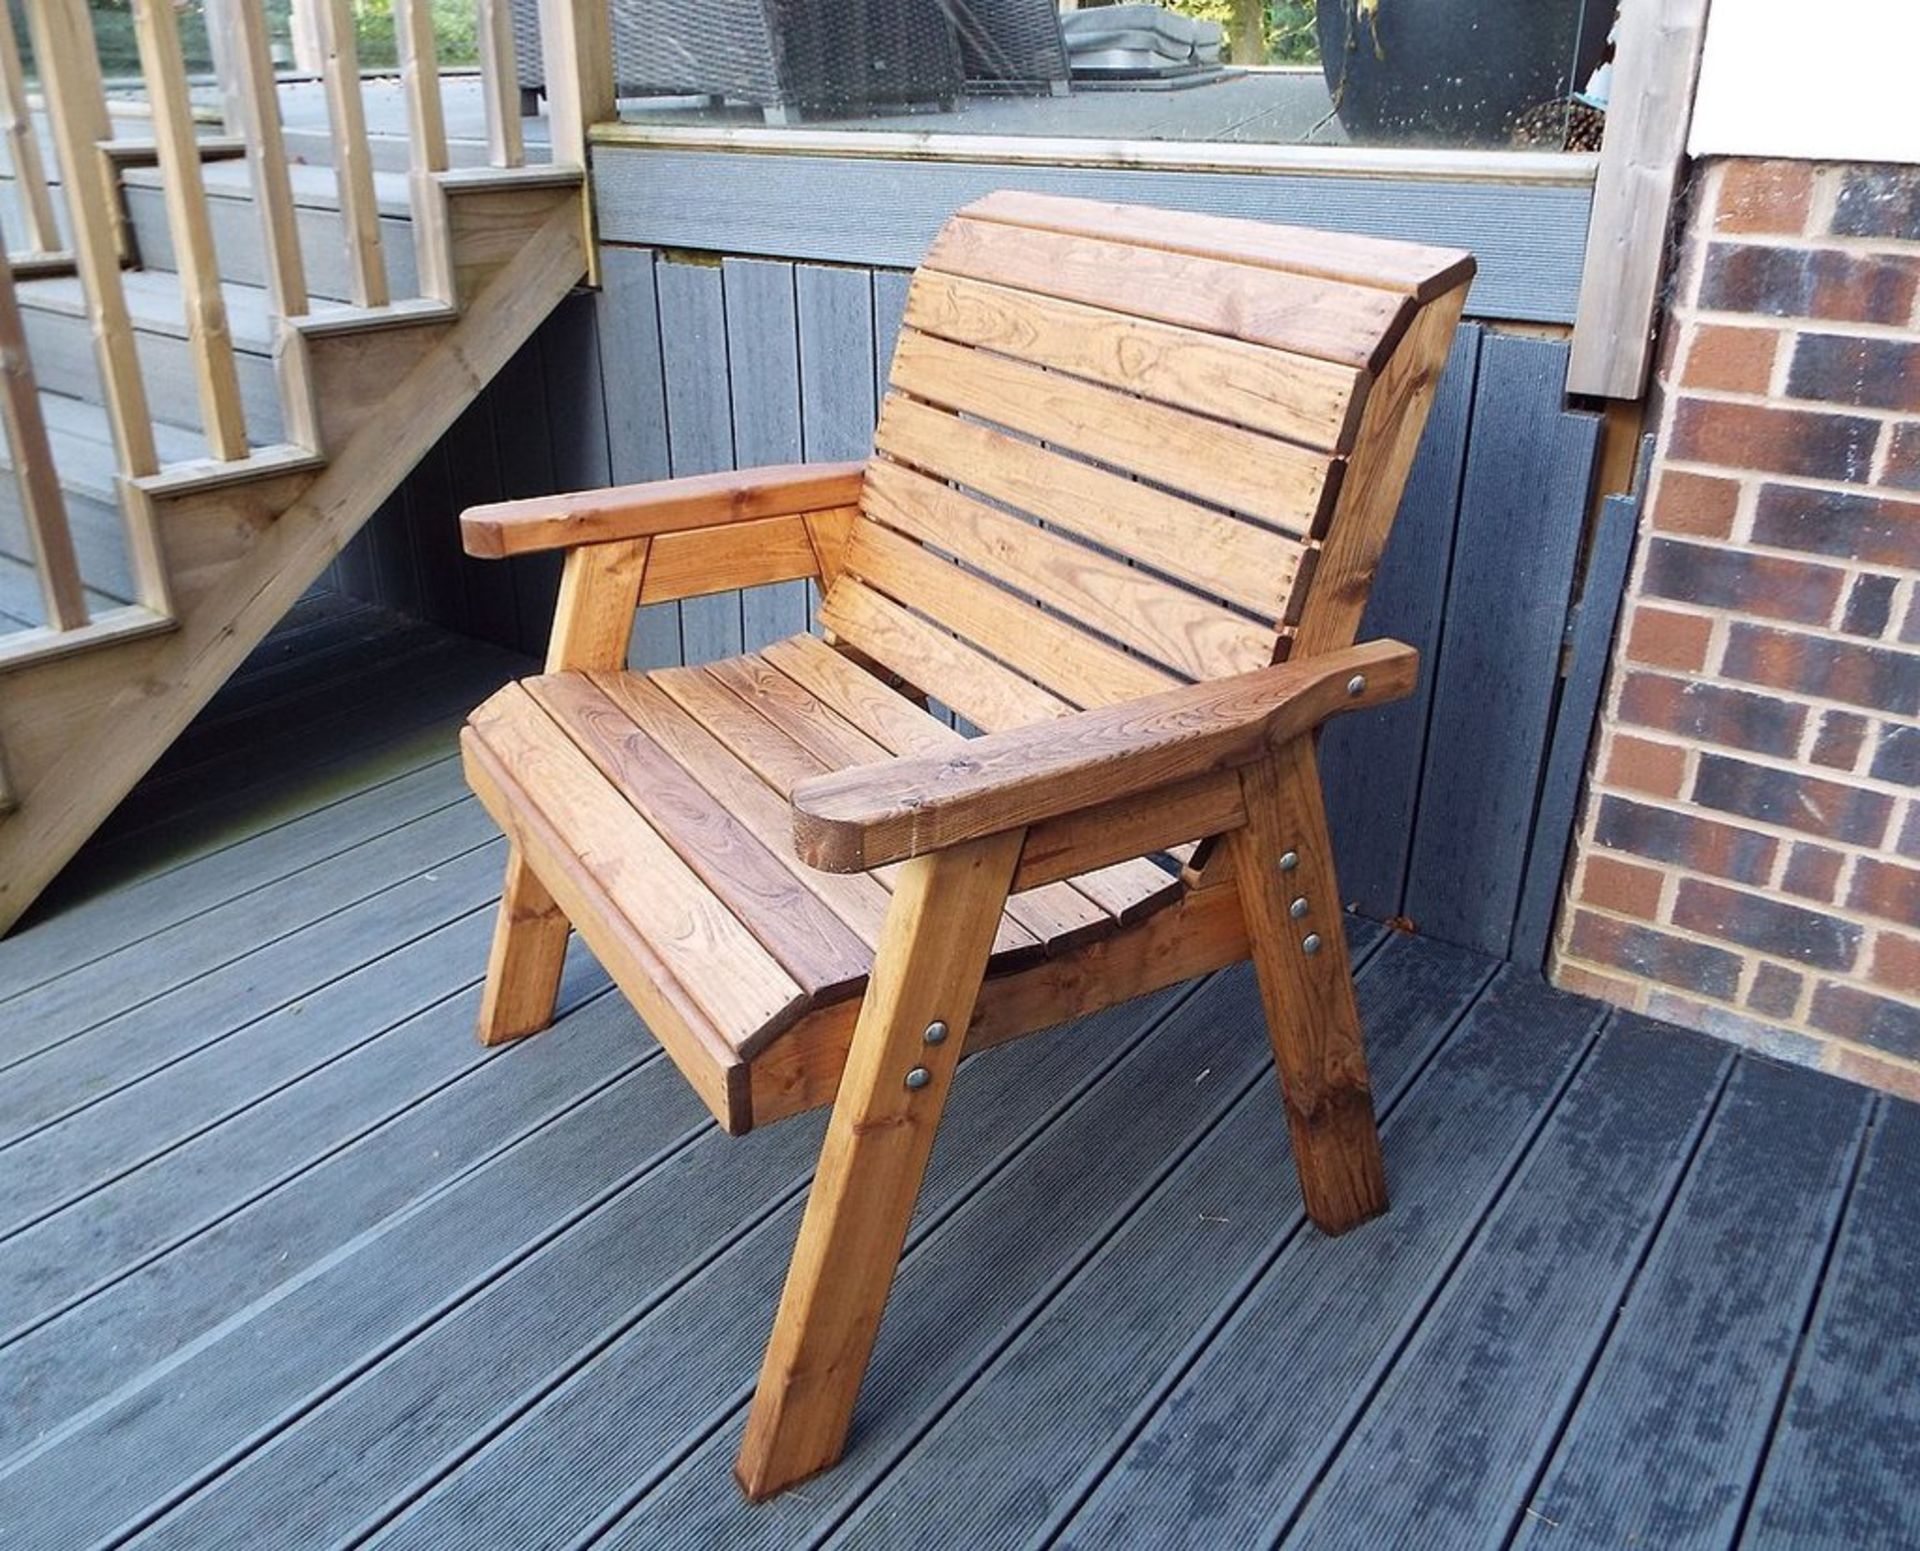 Large Garden chair This superb outdoor garden chair is perfect to create an elegant outdoor